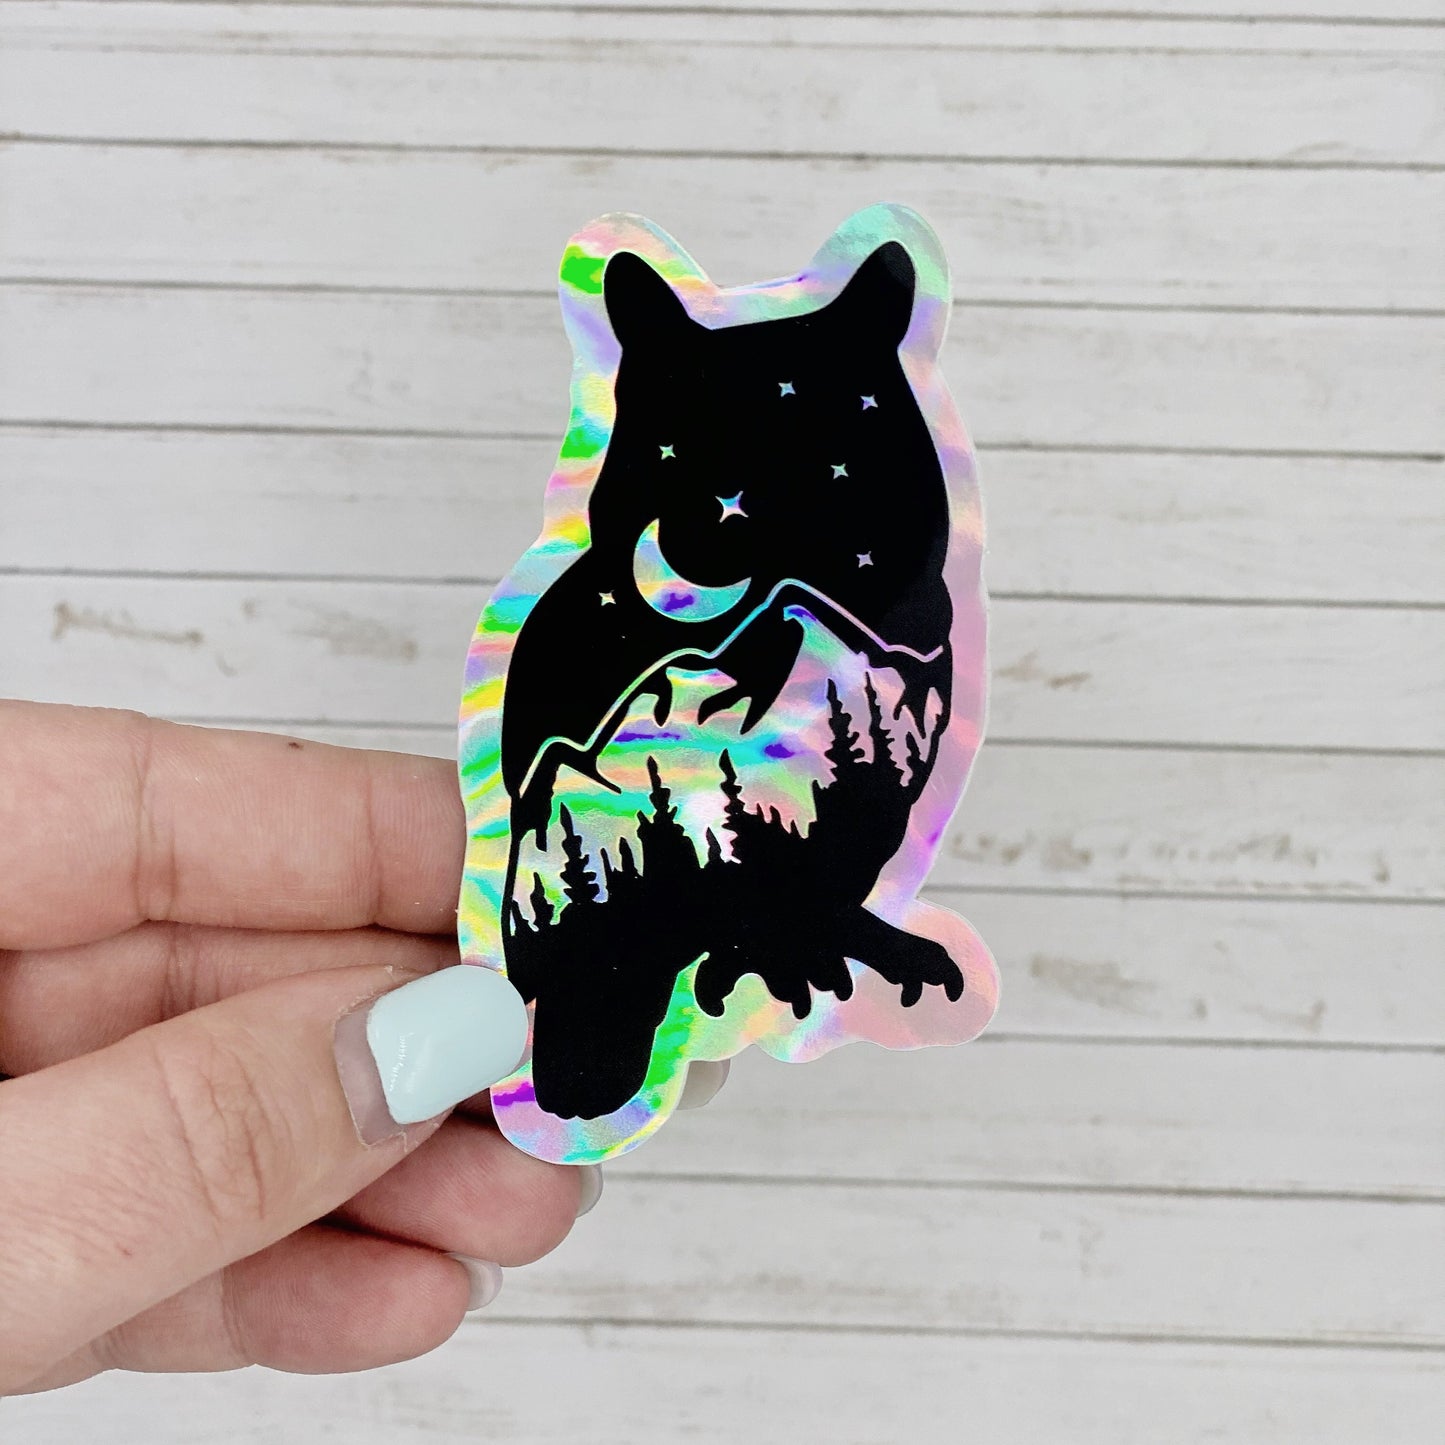 Magical Owl Silhouette Holographic Vinyl Decal